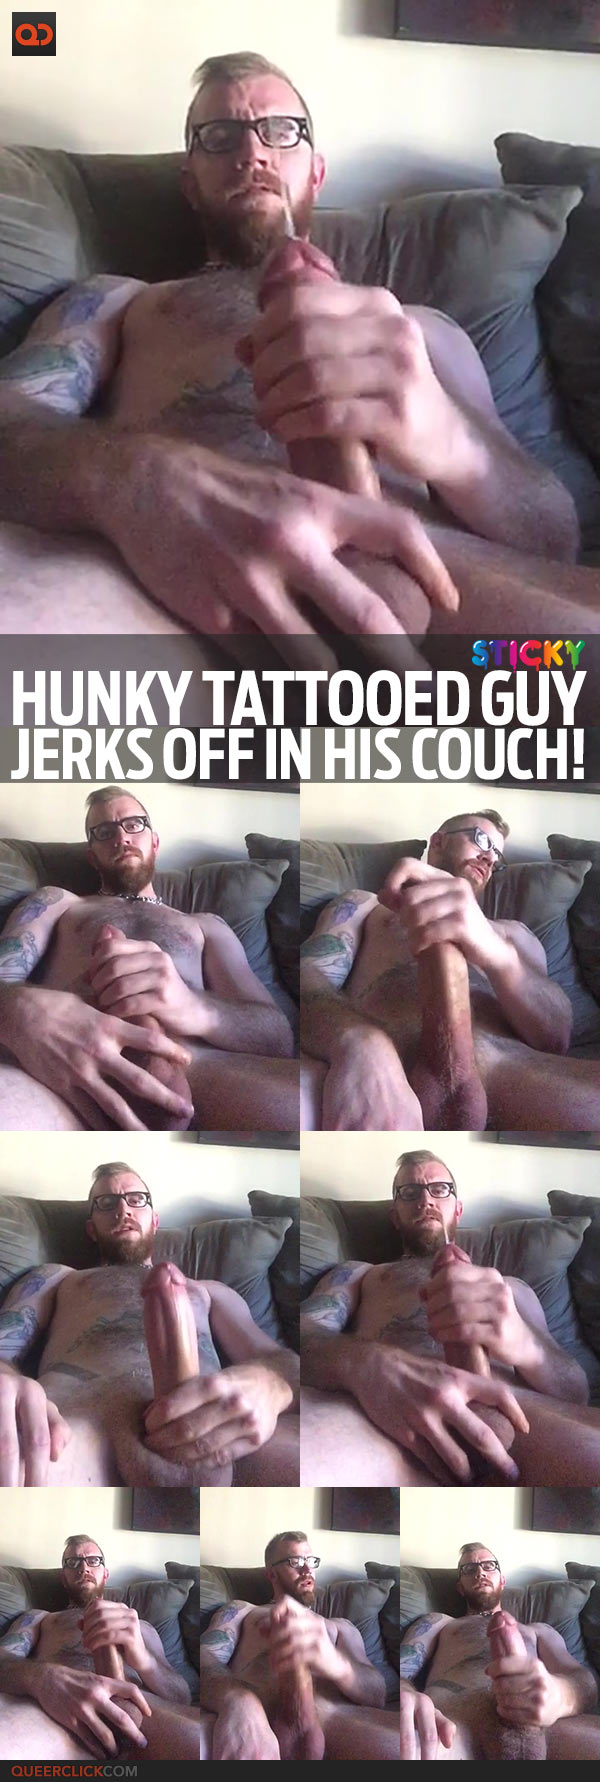 Hunky Tattooed Guy Jerks Off In His Couch!